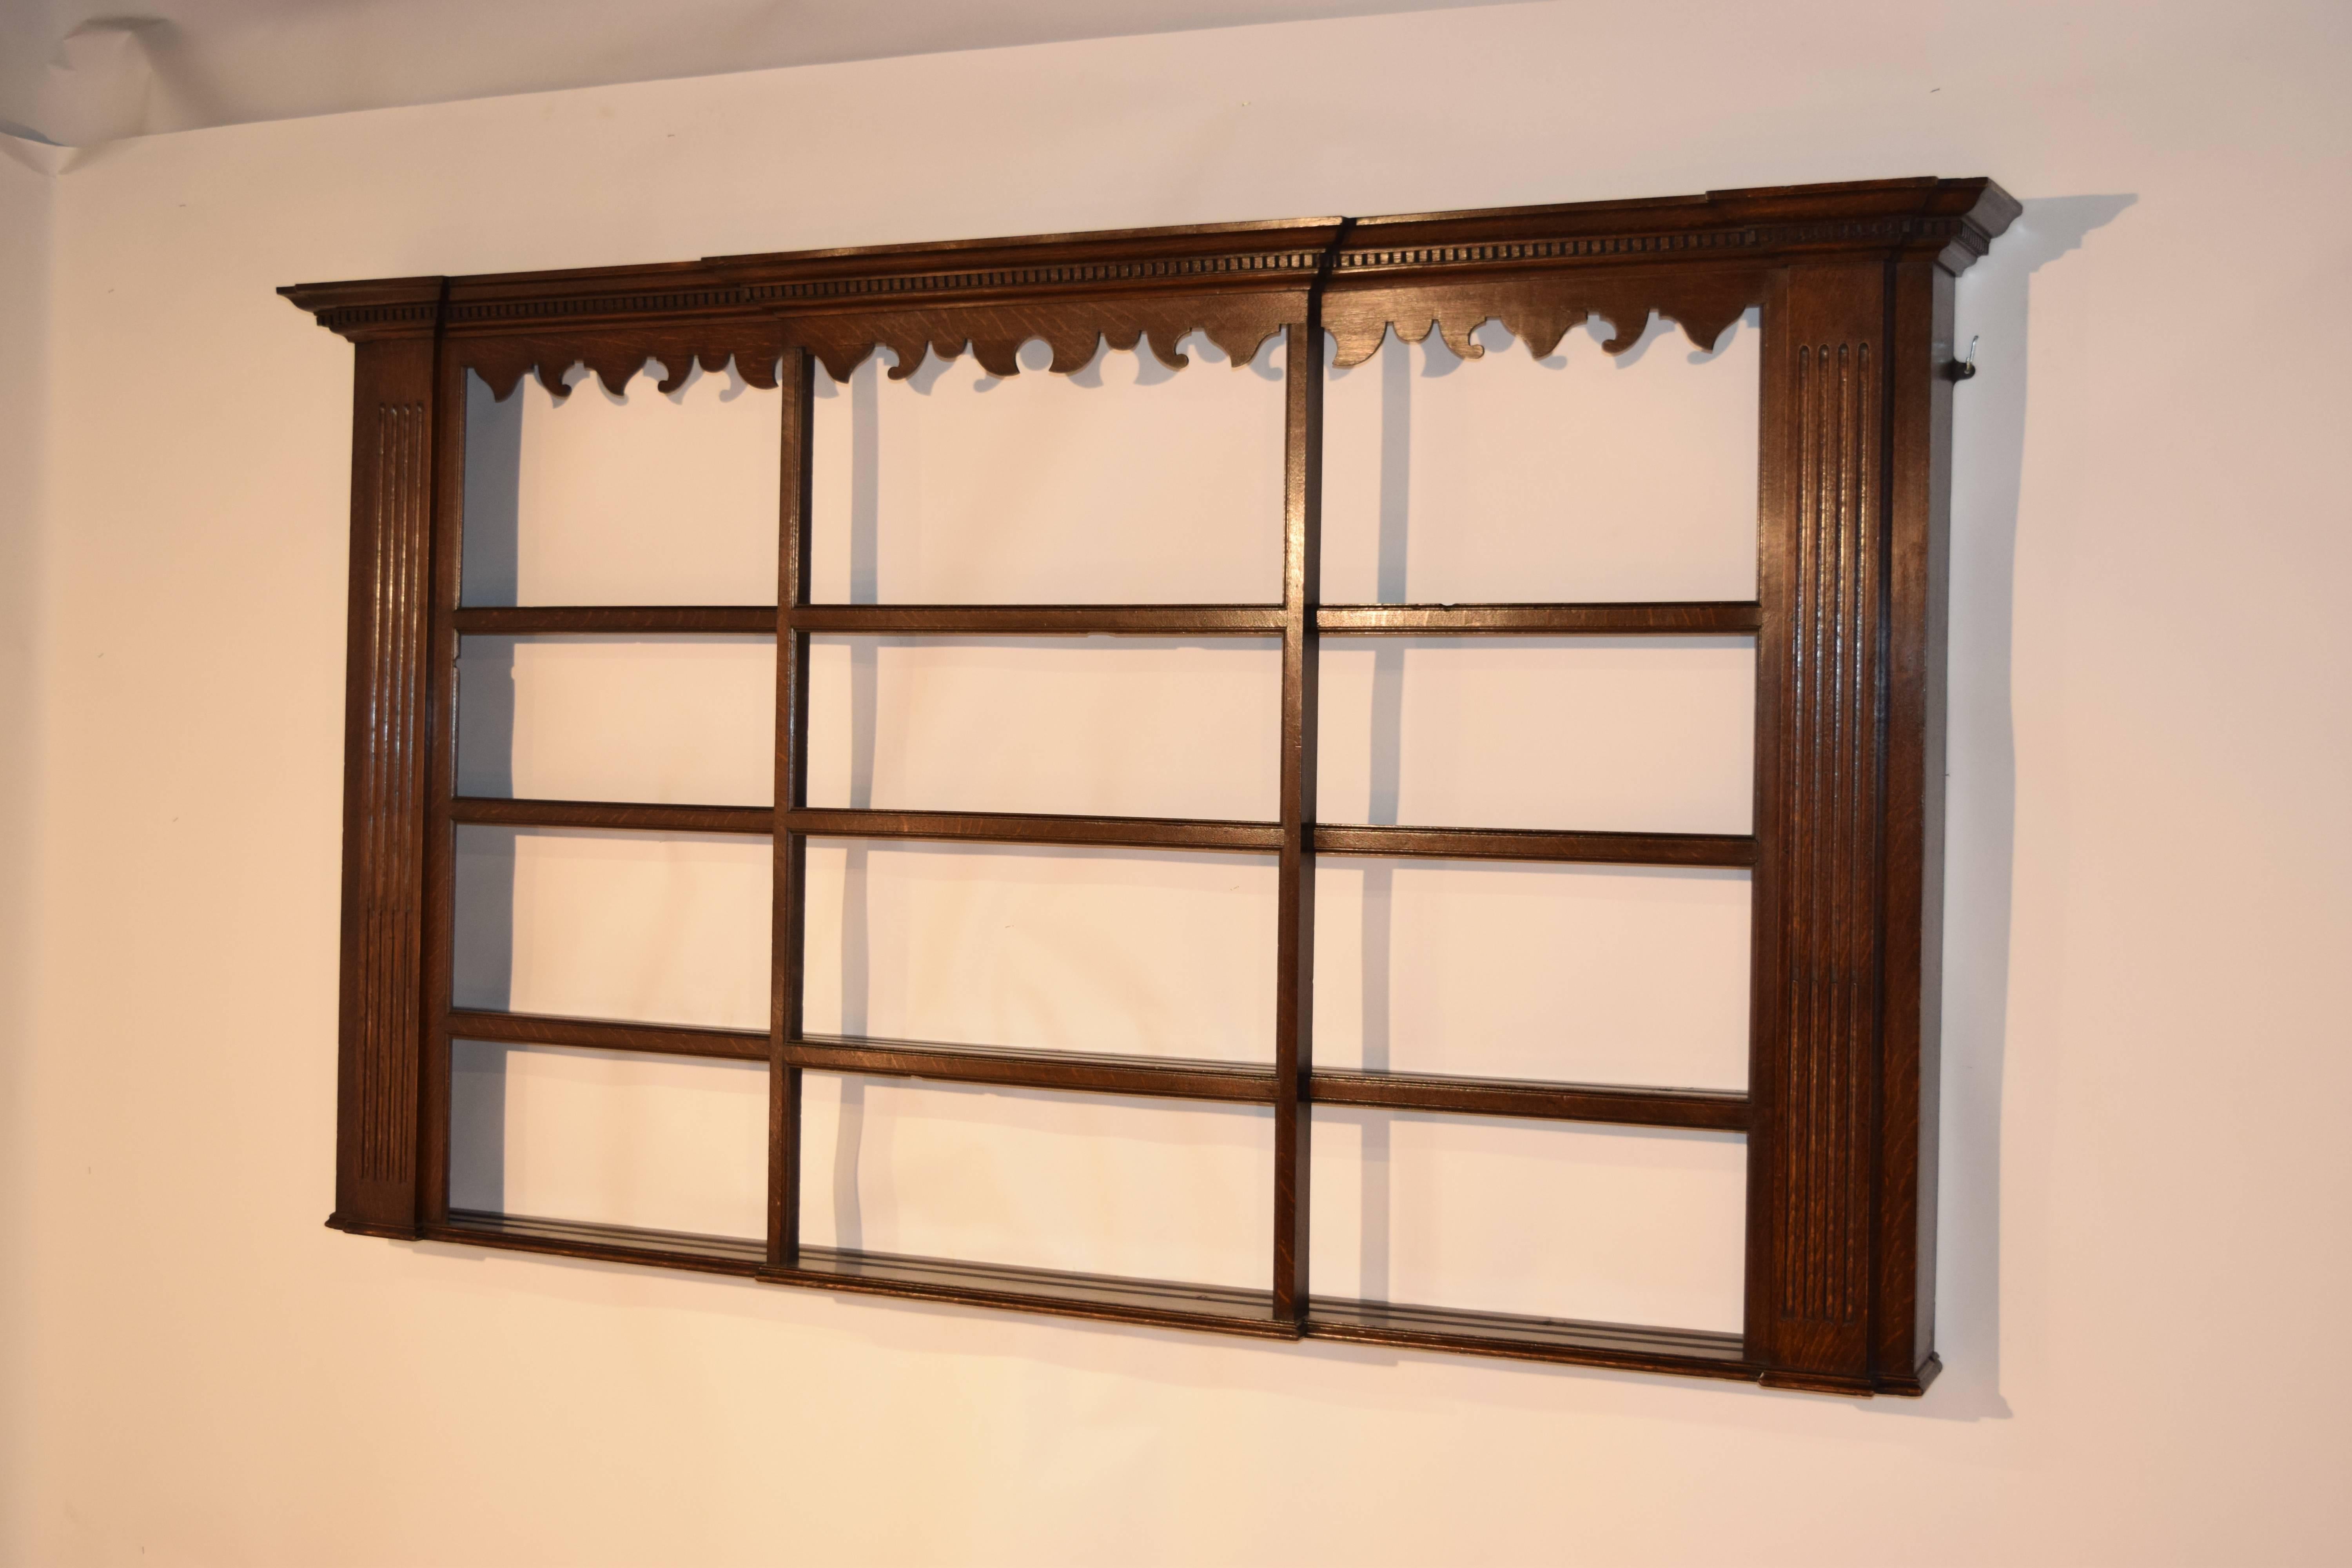 Late 18th century Georgian oak wall shelf with stepped crown molding which has dental detail as well, following down to a lovely hand scalloped apron over four shelves. the shelves are flanked on the sides with fluted columns. Beautiful color and